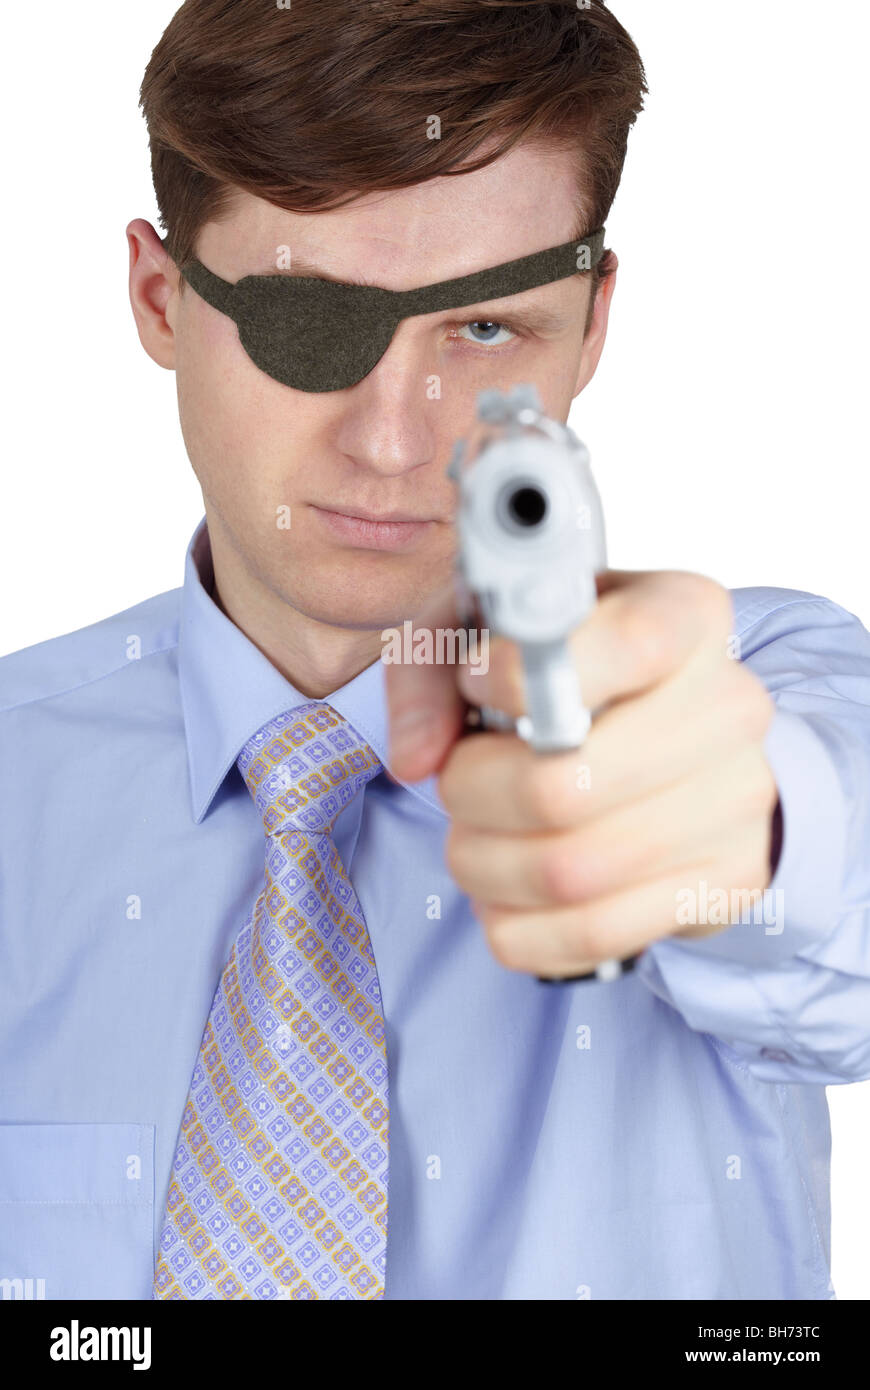 One-eyed robber threatens us with a pistol, isolated on a white background Stock Photo